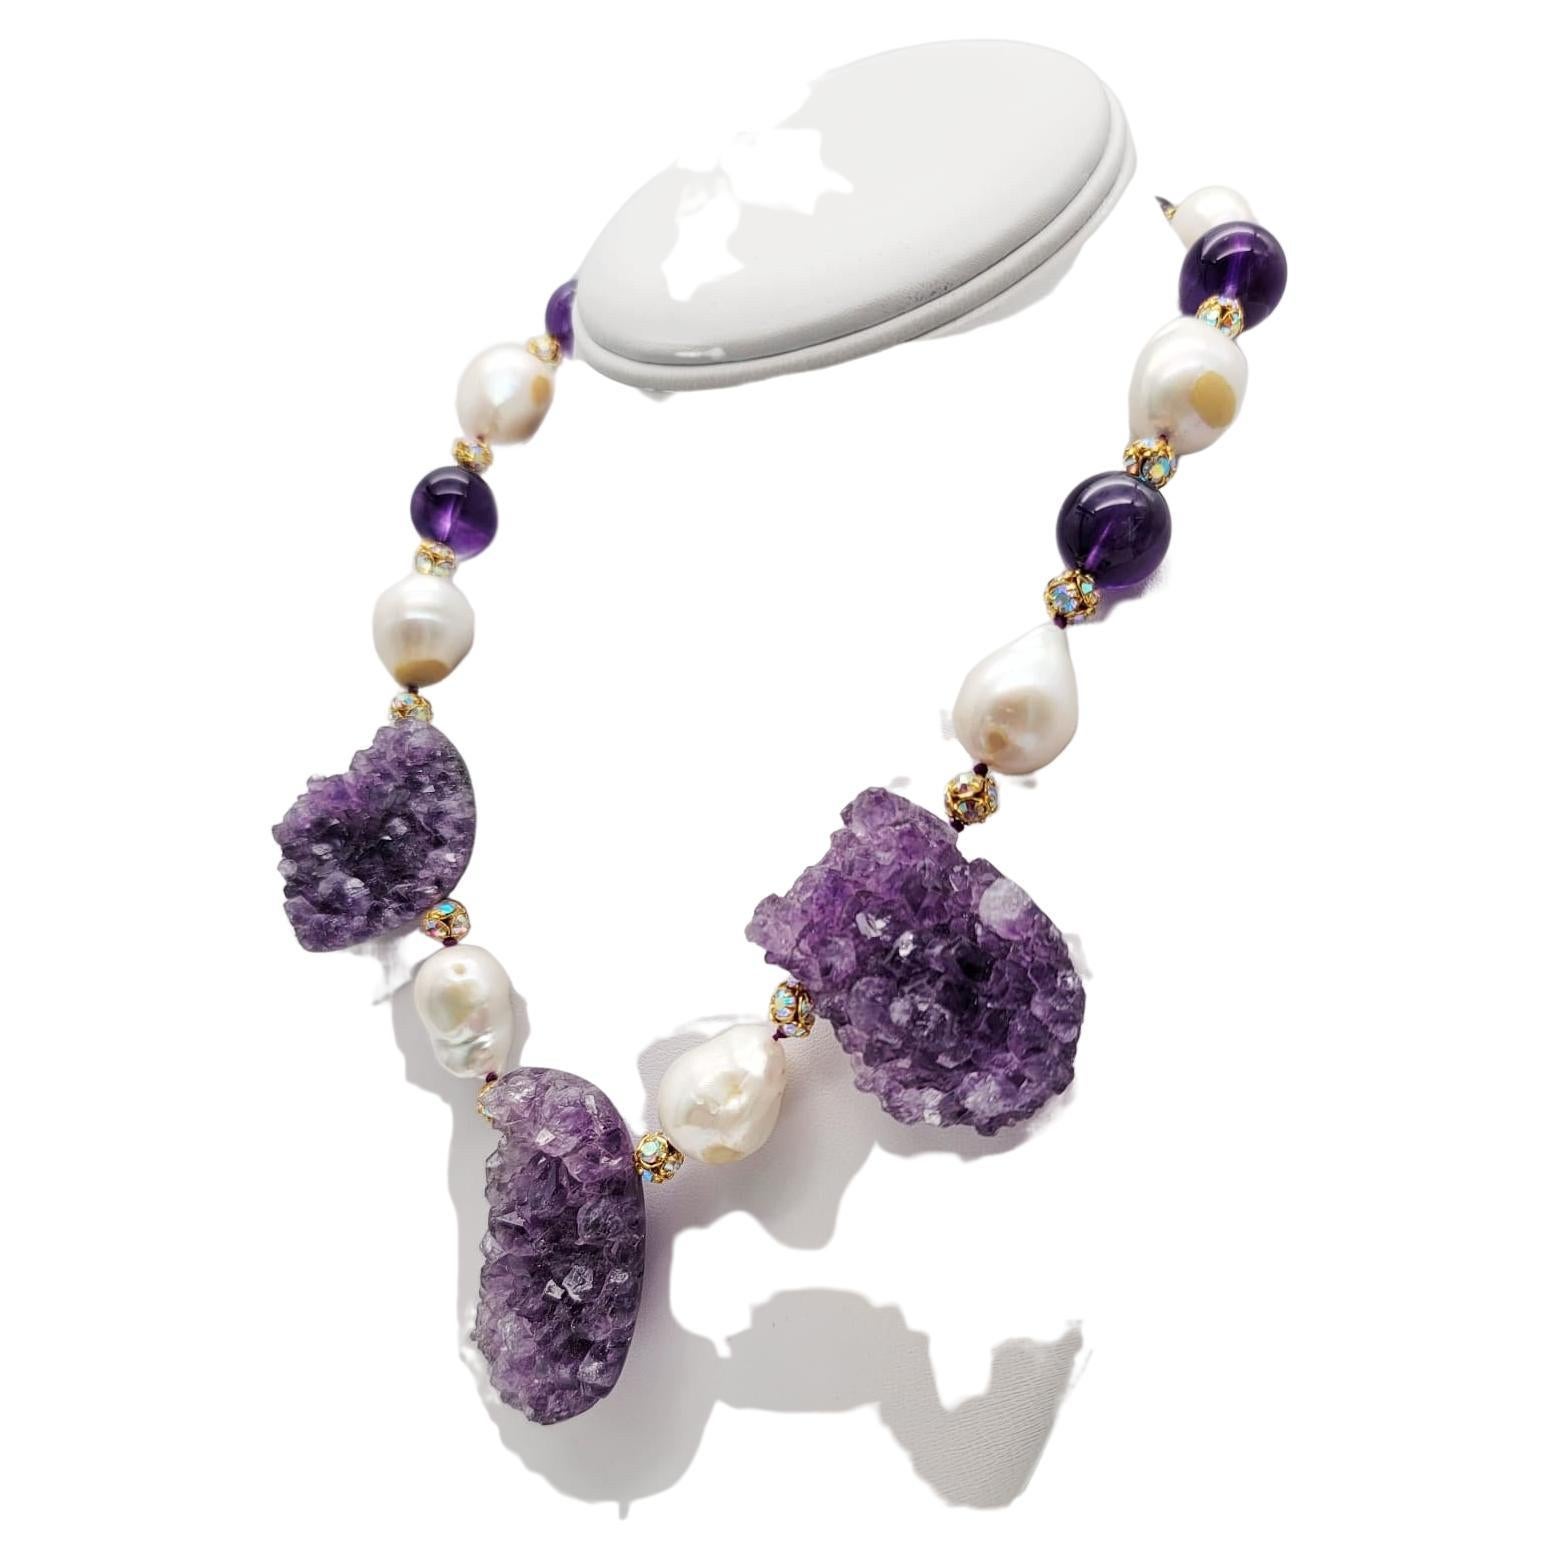 One-of-a-Kind
The kind of necklace that makes your heart beat faster, three beautiful richly veined amethyst geodes with polished back, center a striking necklace of elegant Baroque Pearls mixed with polished Amethyst 16mm beads. Spacers are vermeil